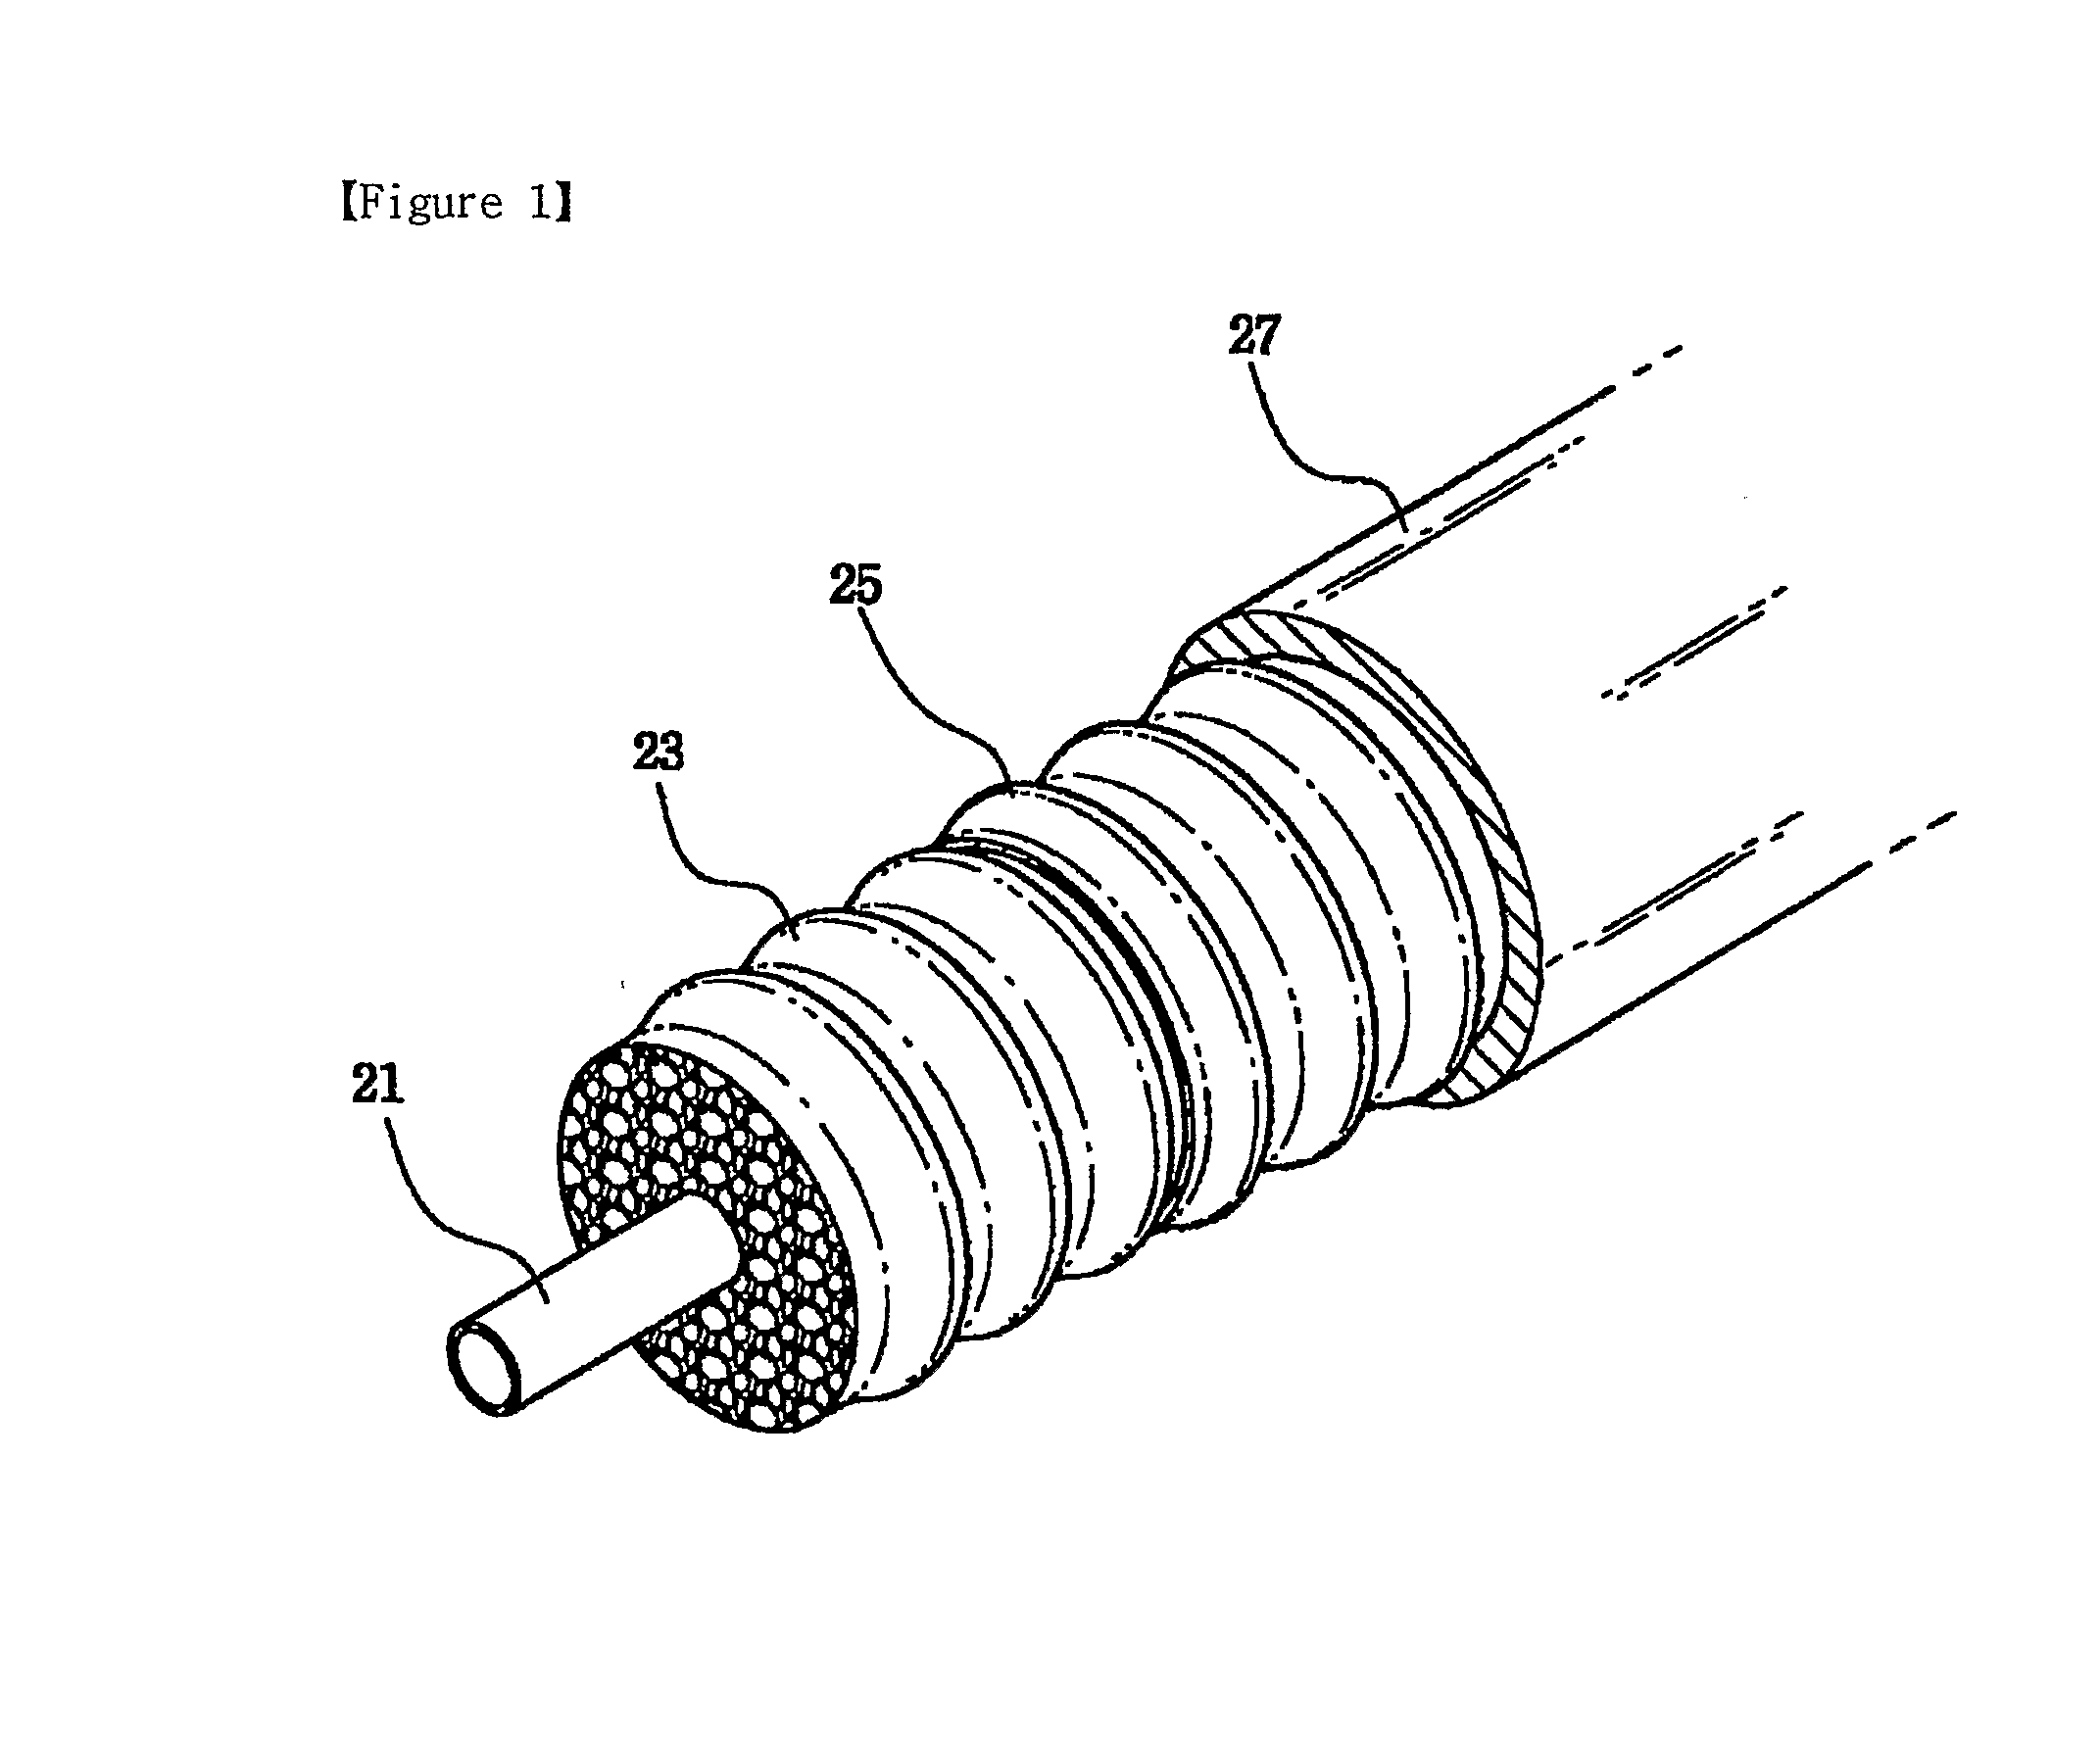 Highly foamed coaxial cable